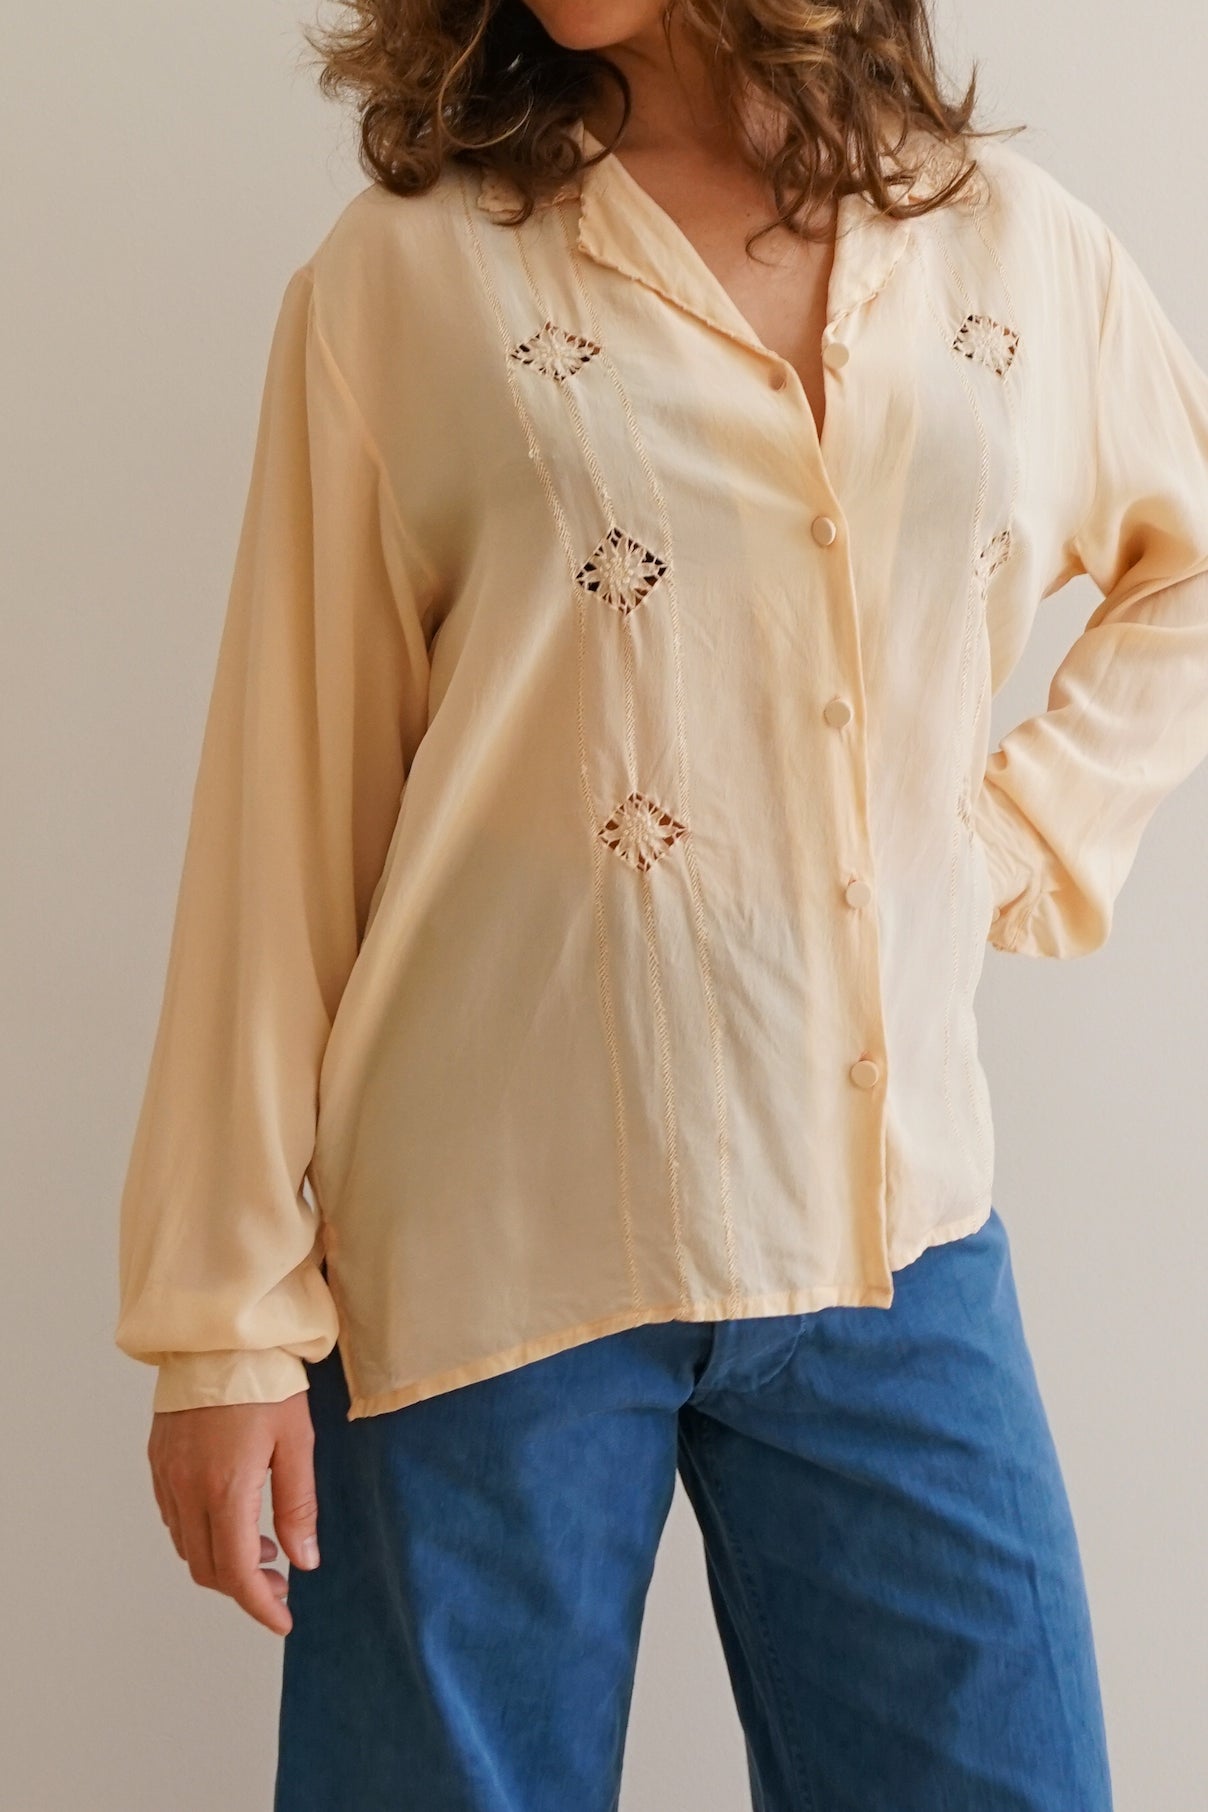 Embroidered Silk Top in Peach